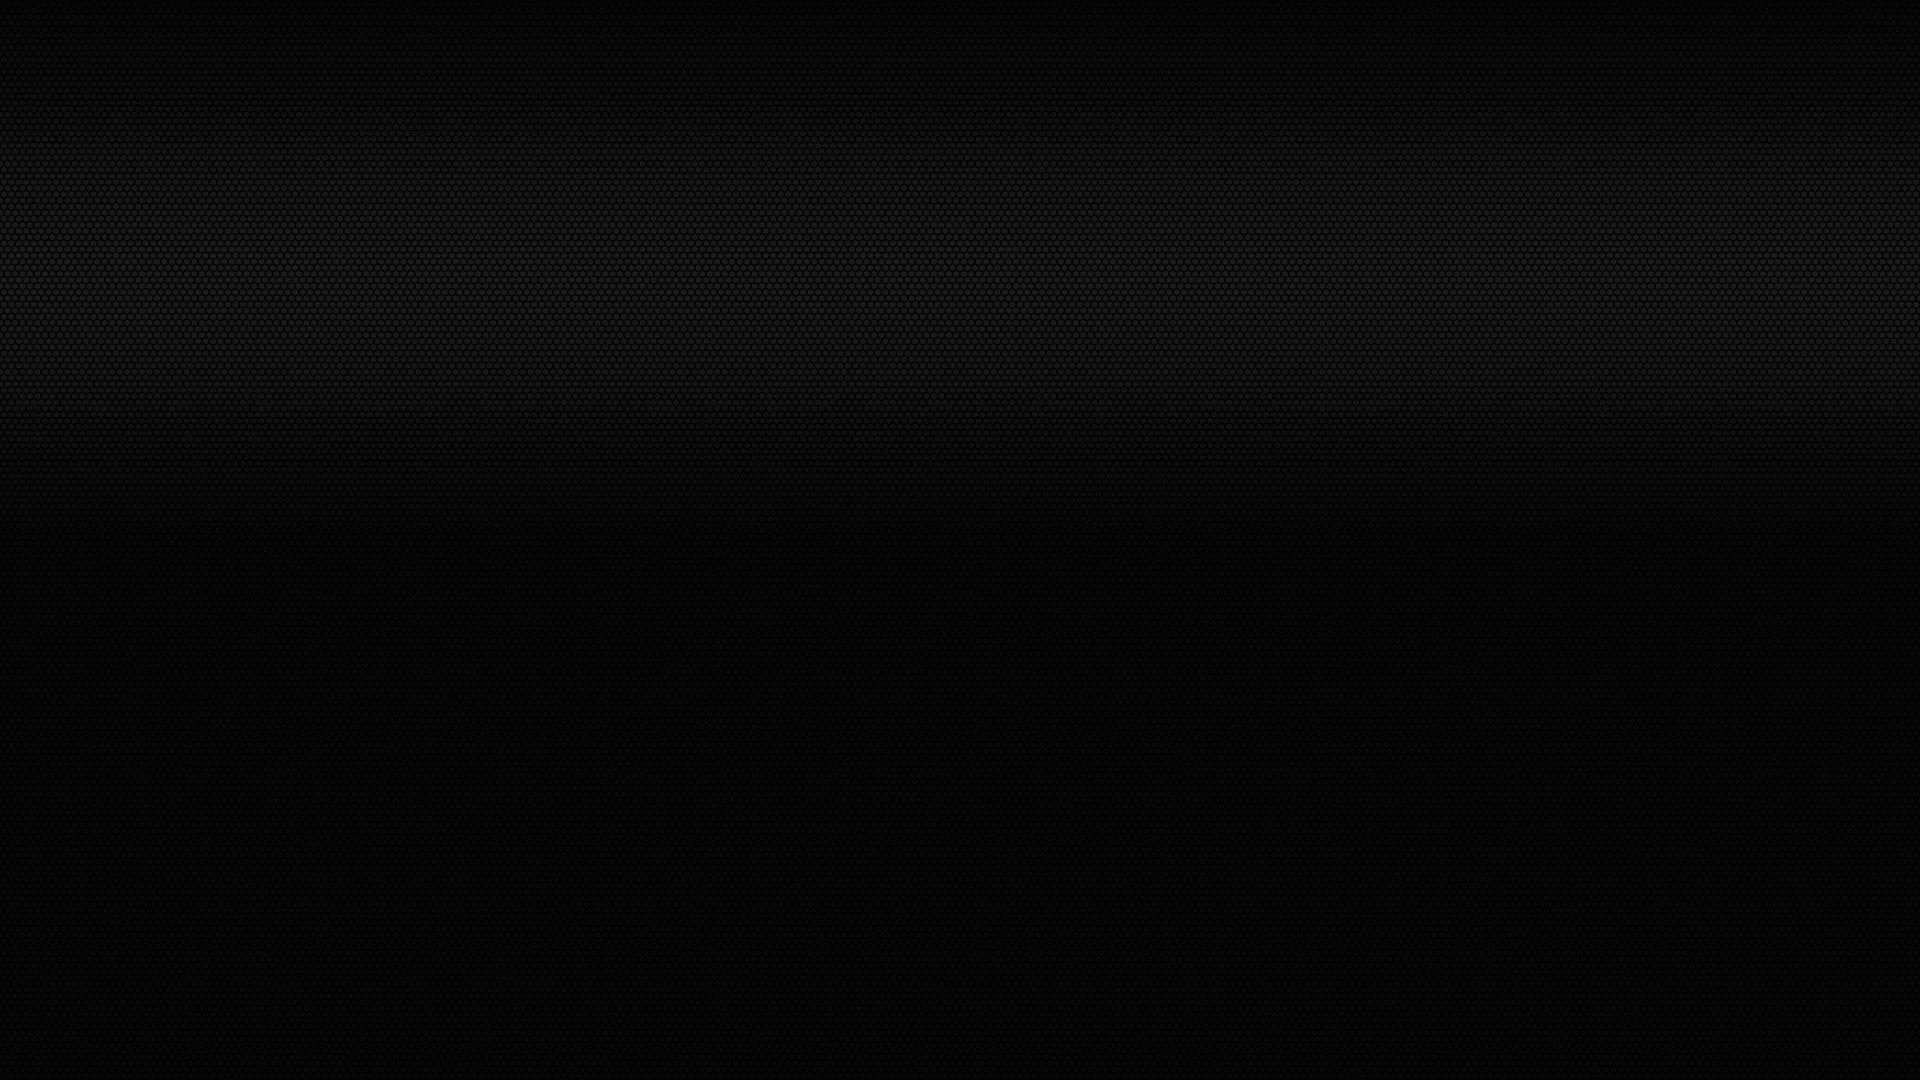 Pure Black HD Wallpapers - Top Free Pure Black HD Backgrounds